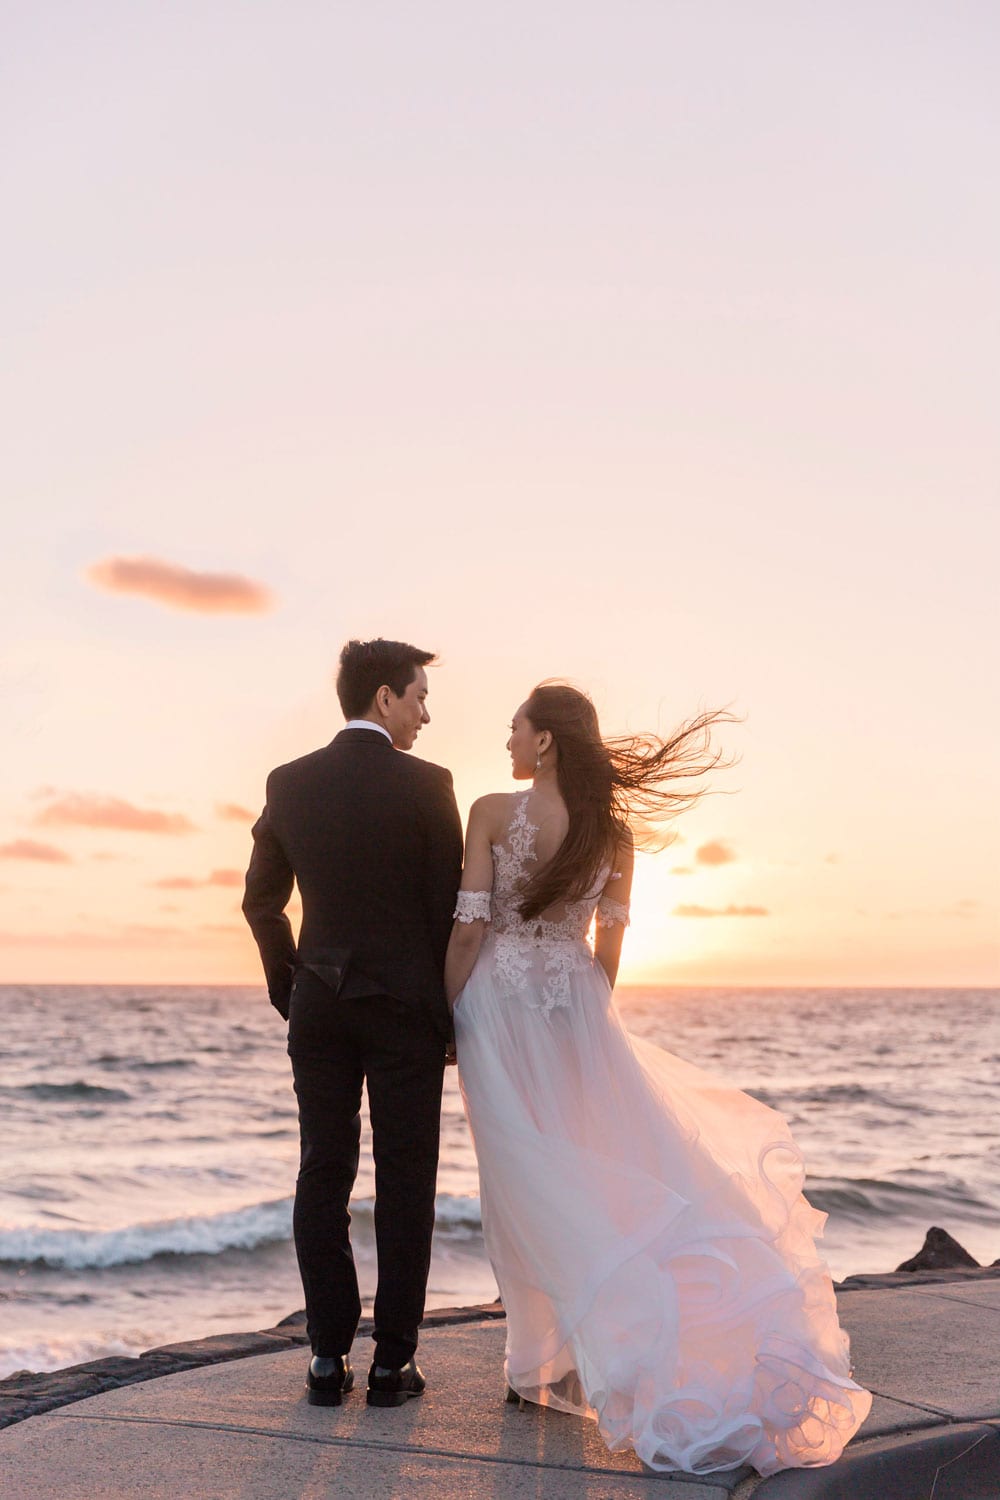 The Best New Wedding Photography Trends ...